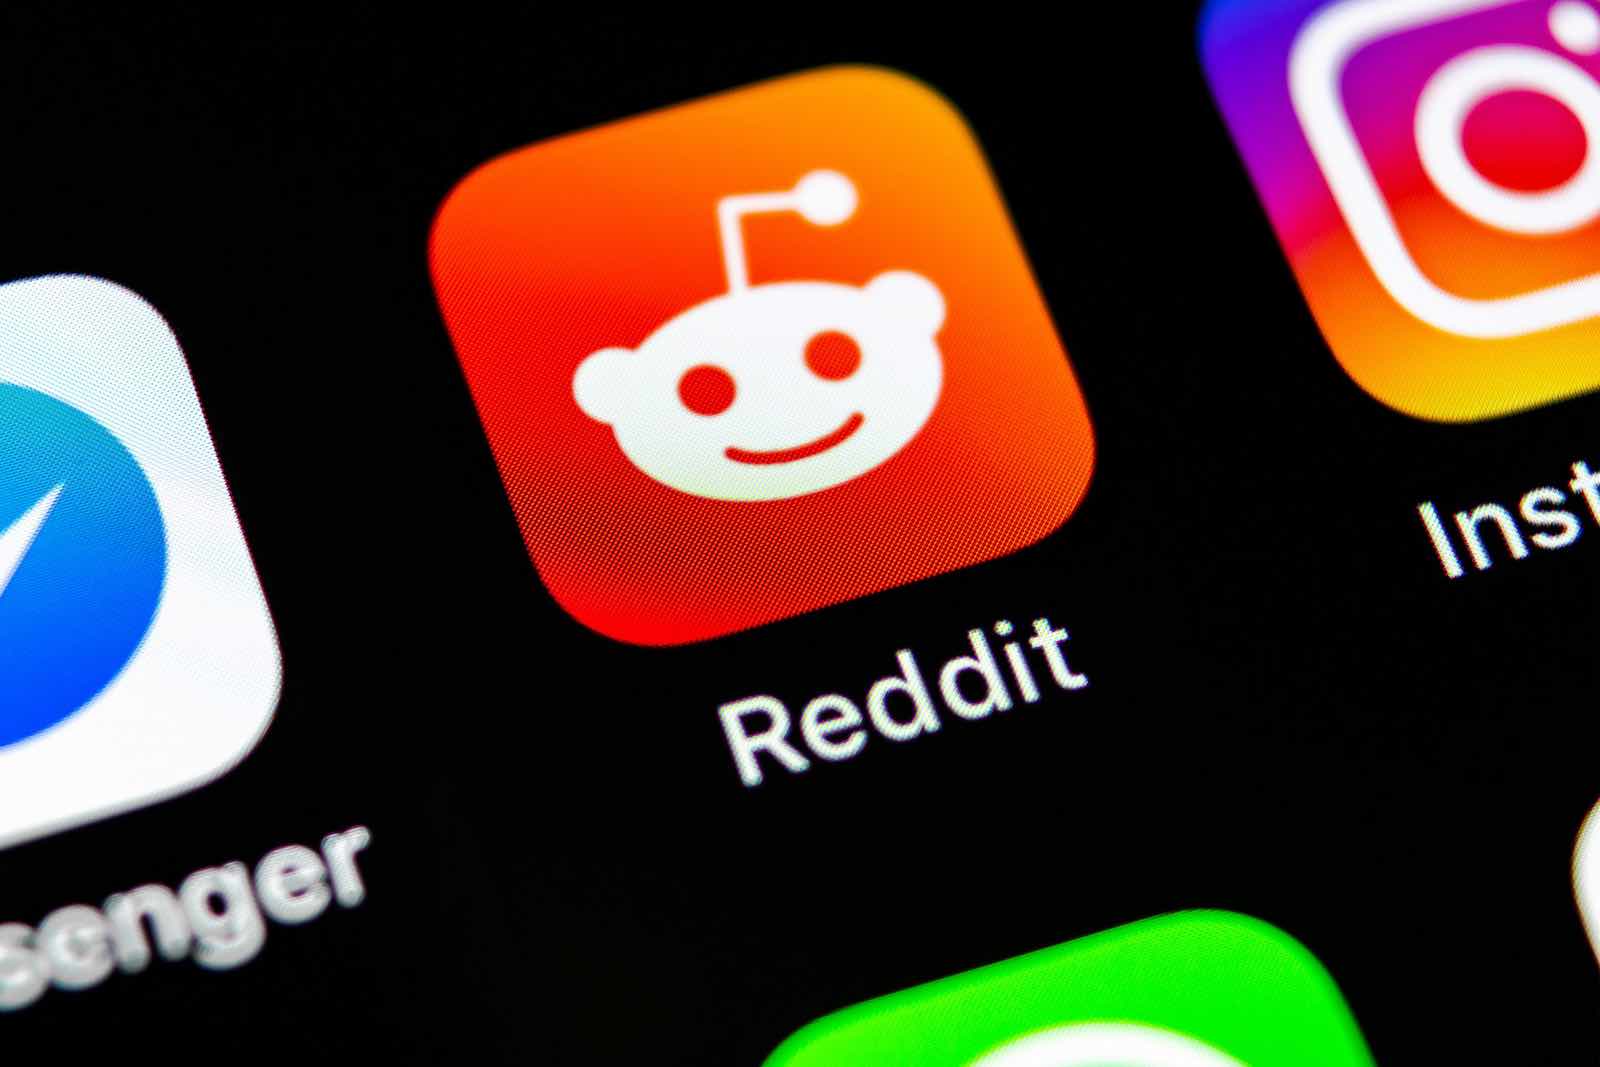 Thousands of Reddit users are protesting new API policies